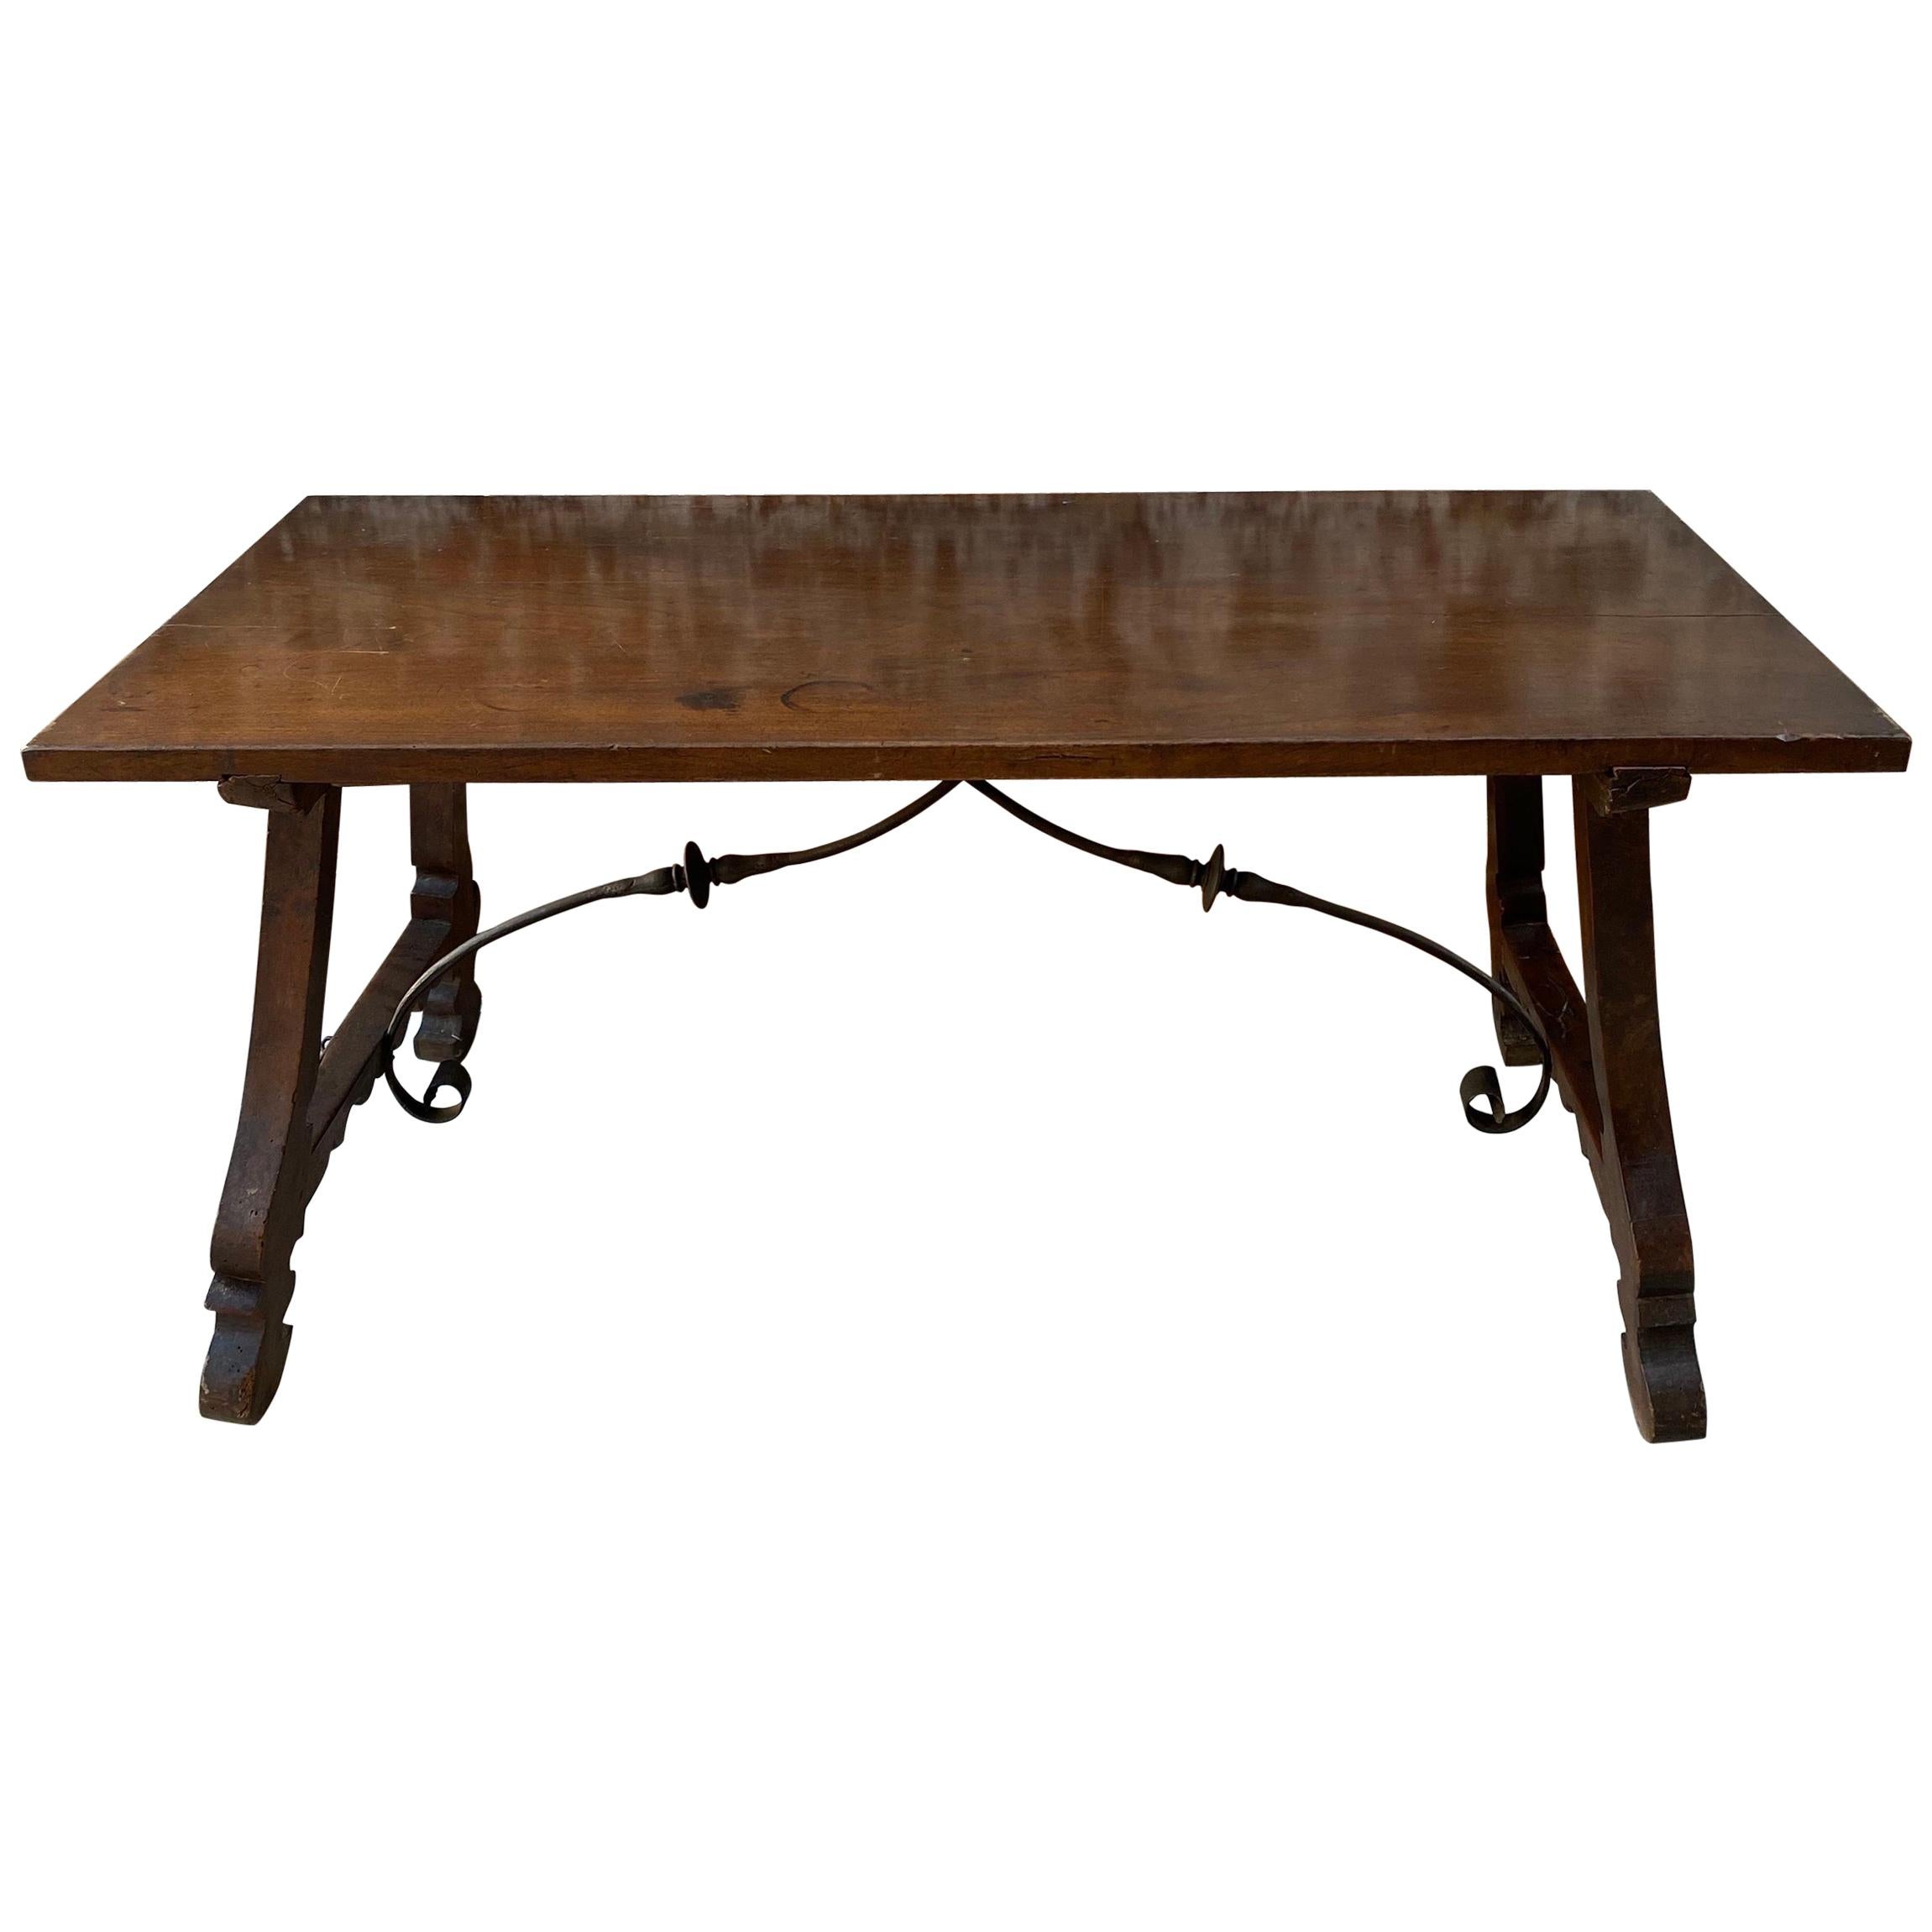 Spanish Farm Table with Trestle Base and Iron Support For Sale